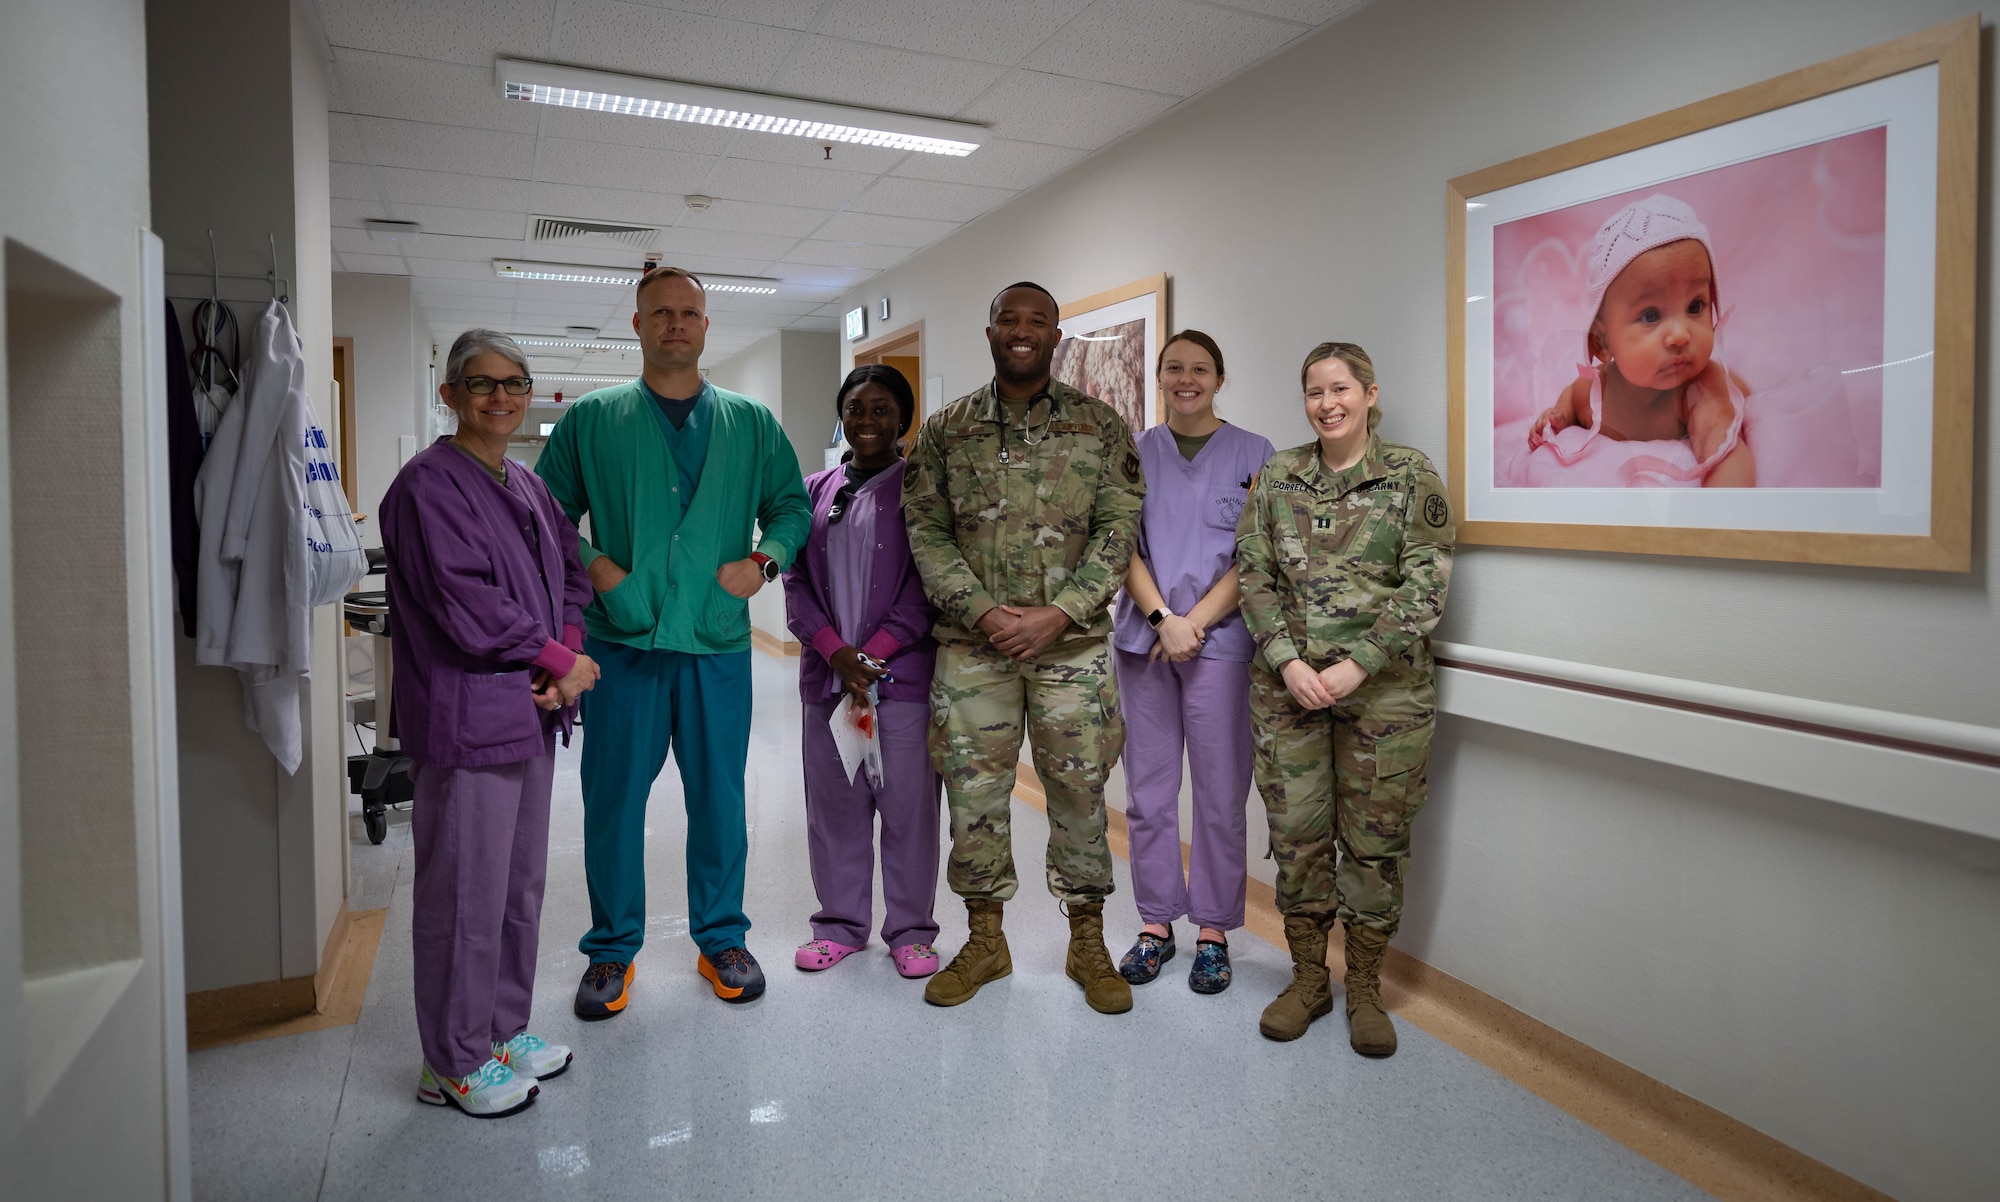 Members of the Division of Women’s Health and Newborn Care Labor and Delivery team, are responsible for caring for antepartum, intrapartum and postpartum patients at Landstuhl Regional Medical Center, Nov. 9, 2021. U.S. Air Force Staff Sgt. Lamaar Melvin, third from right, 86th Medical Squadron Labor and Delivery supervisor, is responsible for running the Labor and Delivery floor, where he aids in the health and wellness of newborns. (U.S. Air Force photo by Airman Jared Lovett)